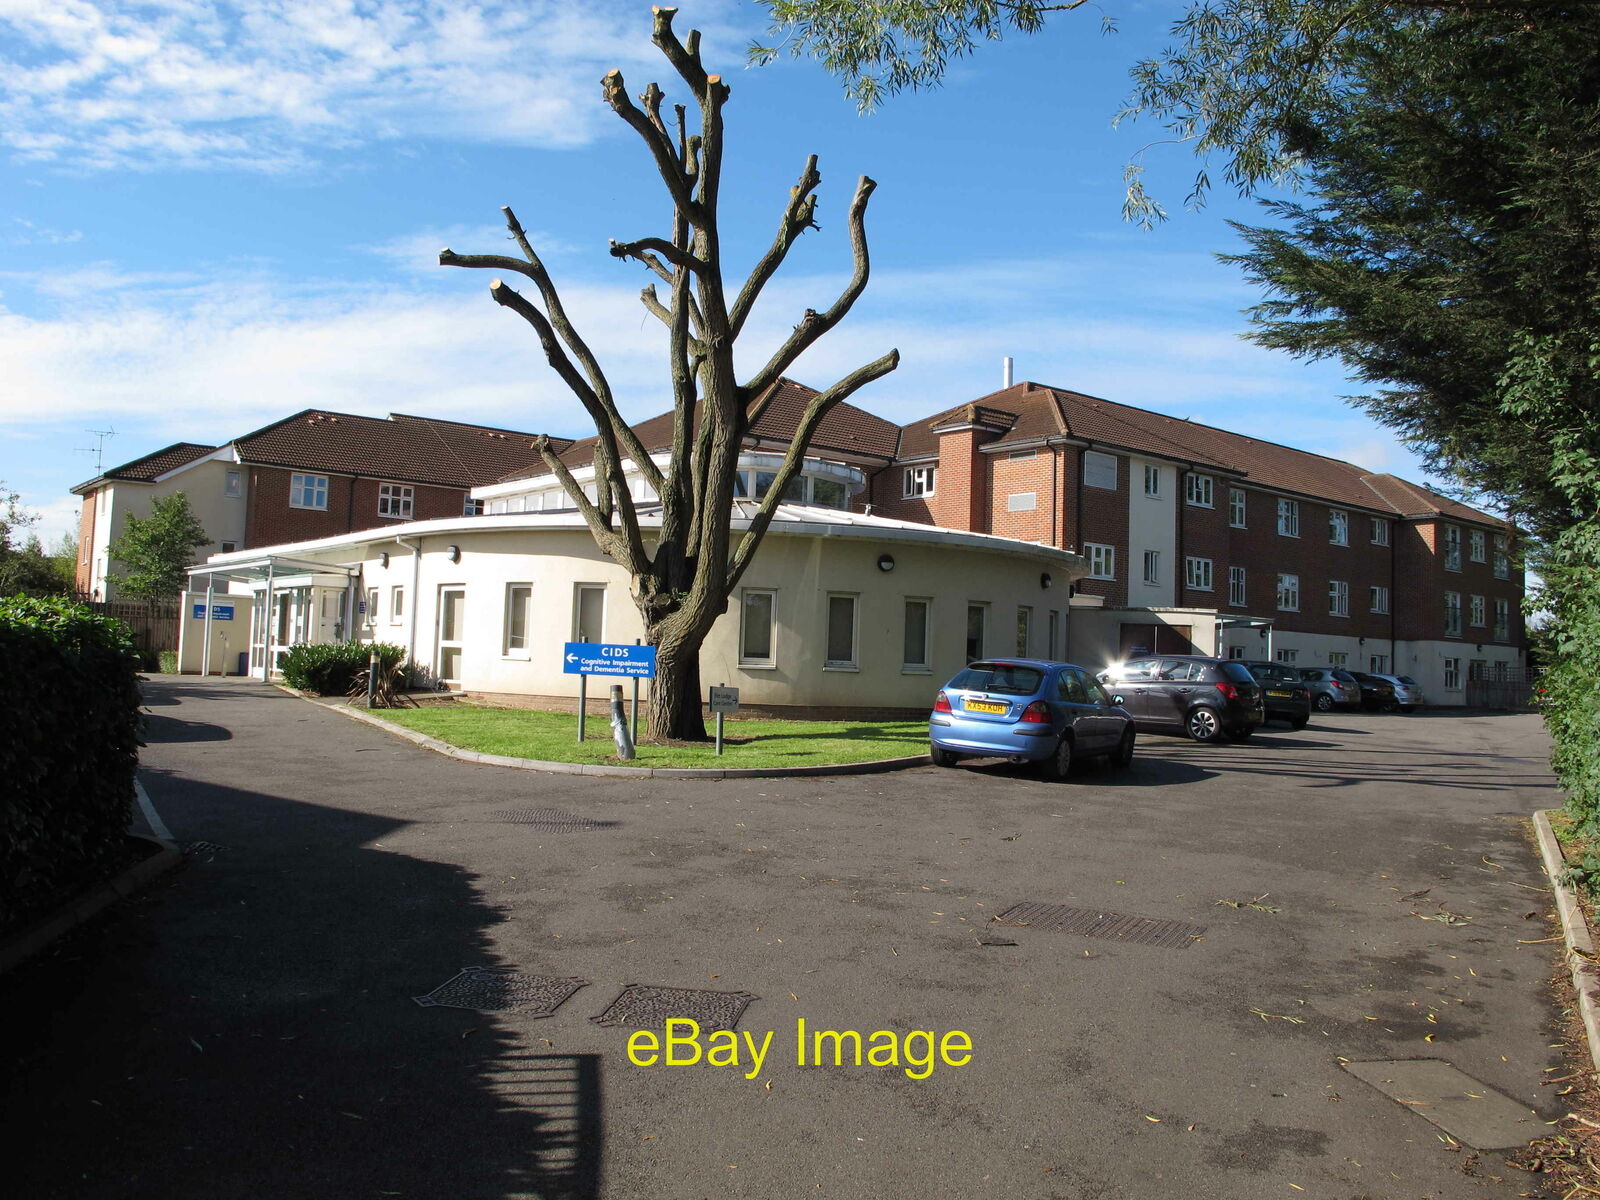 Photo 12x8 Cognitive Impairment and Dementia Centre Ealing Elm Lodge in Ma c2015